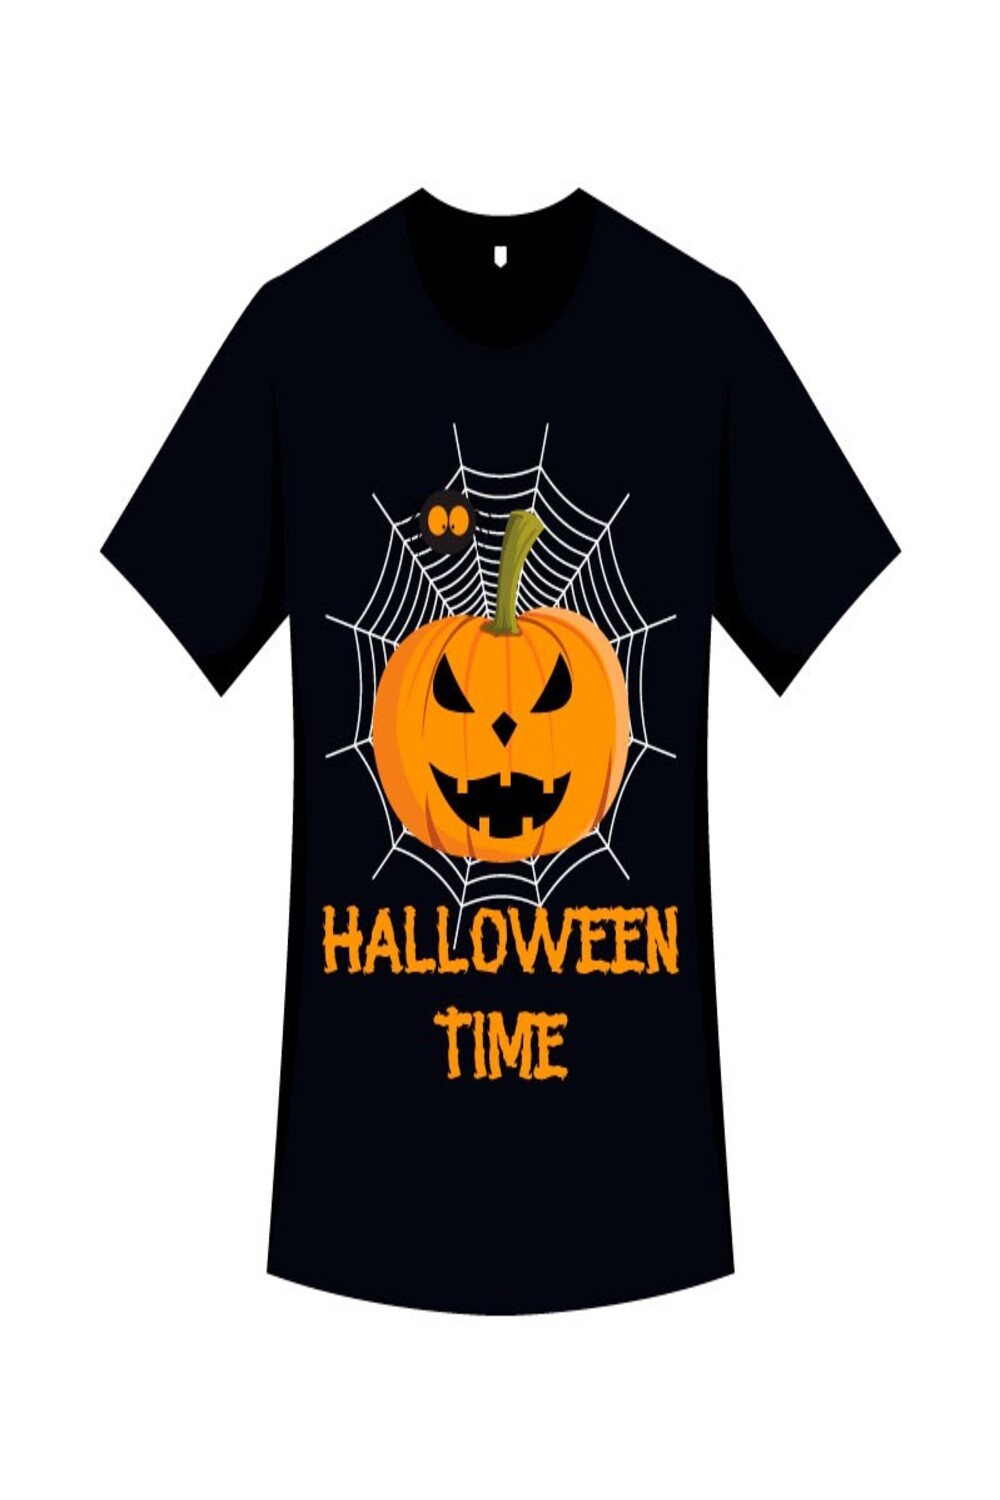 Black t-shirt with orange pumpkin on the background of the cobweb.